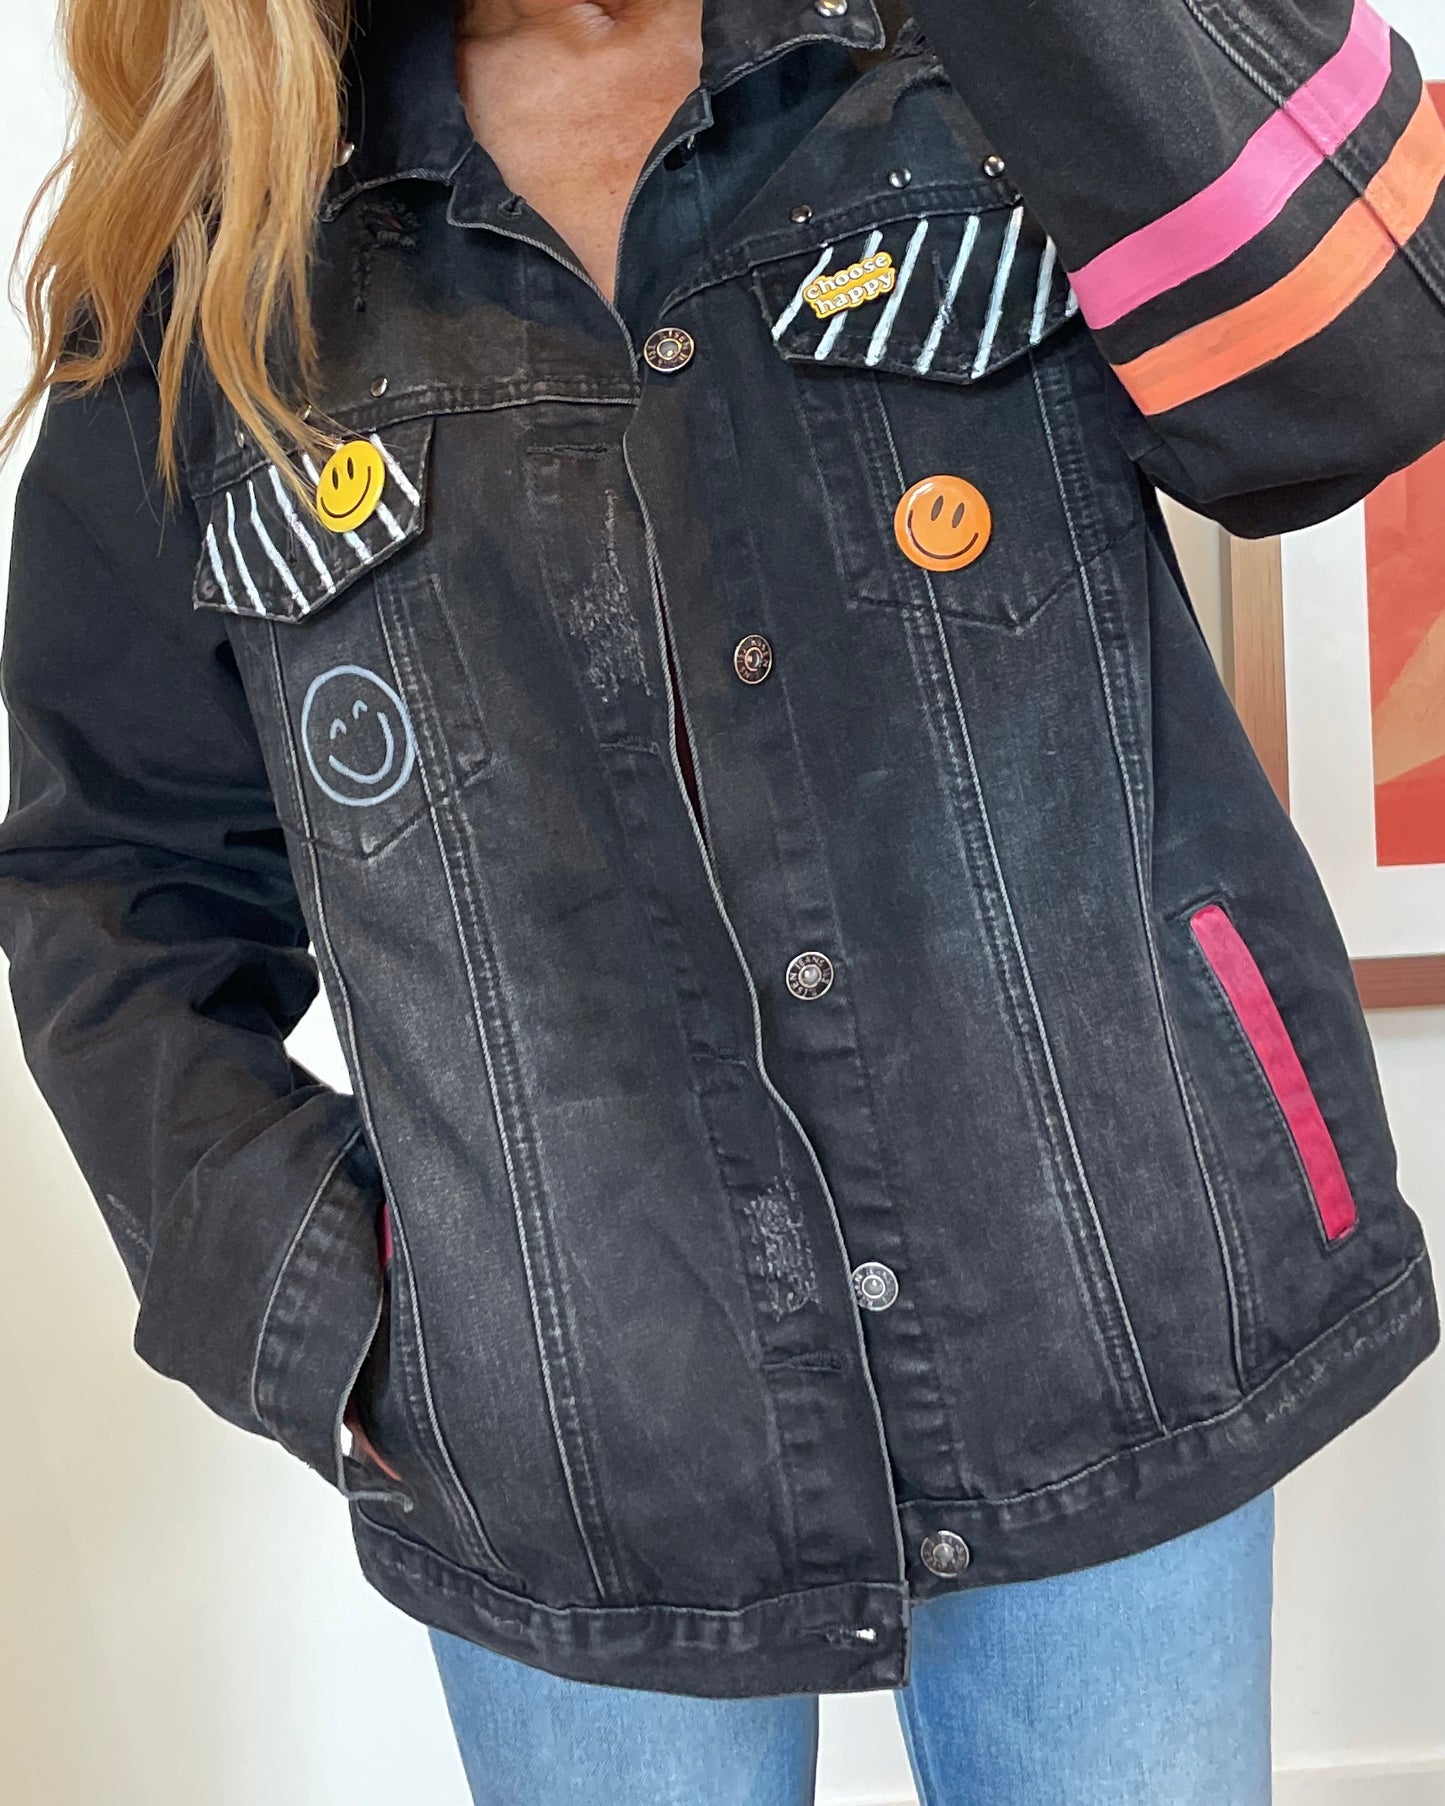 CHOOSE HAPPY - Hand painted jacket